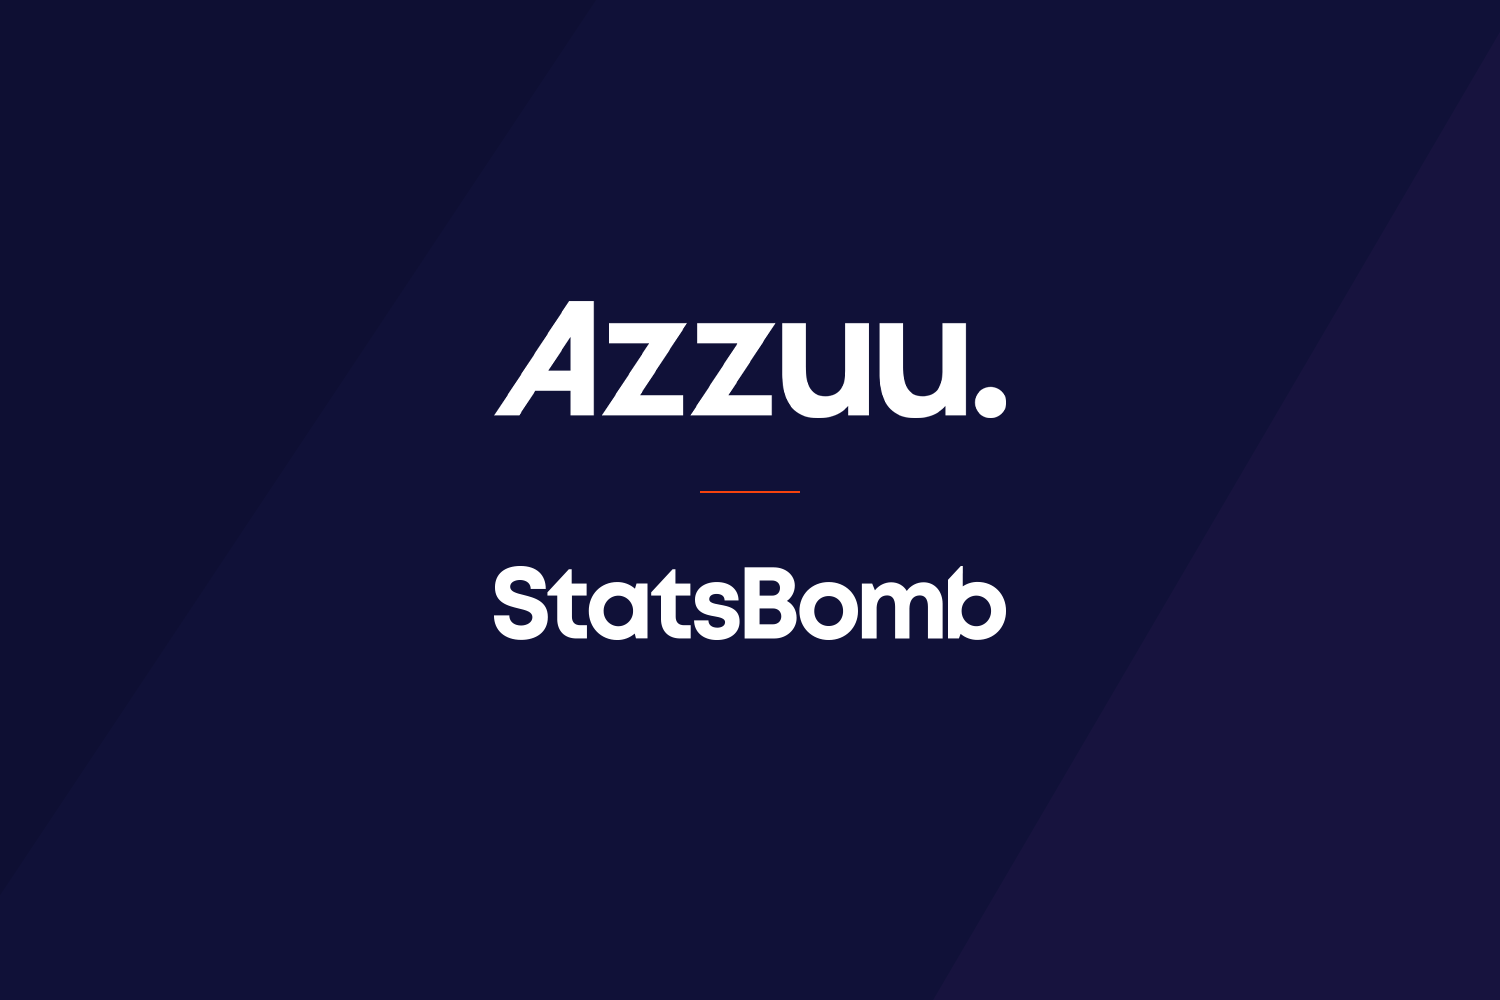 StatsBomb Welcomes Azzuu To Its Partner Programme, Expanding Creative Data Insights For Mutual Customers